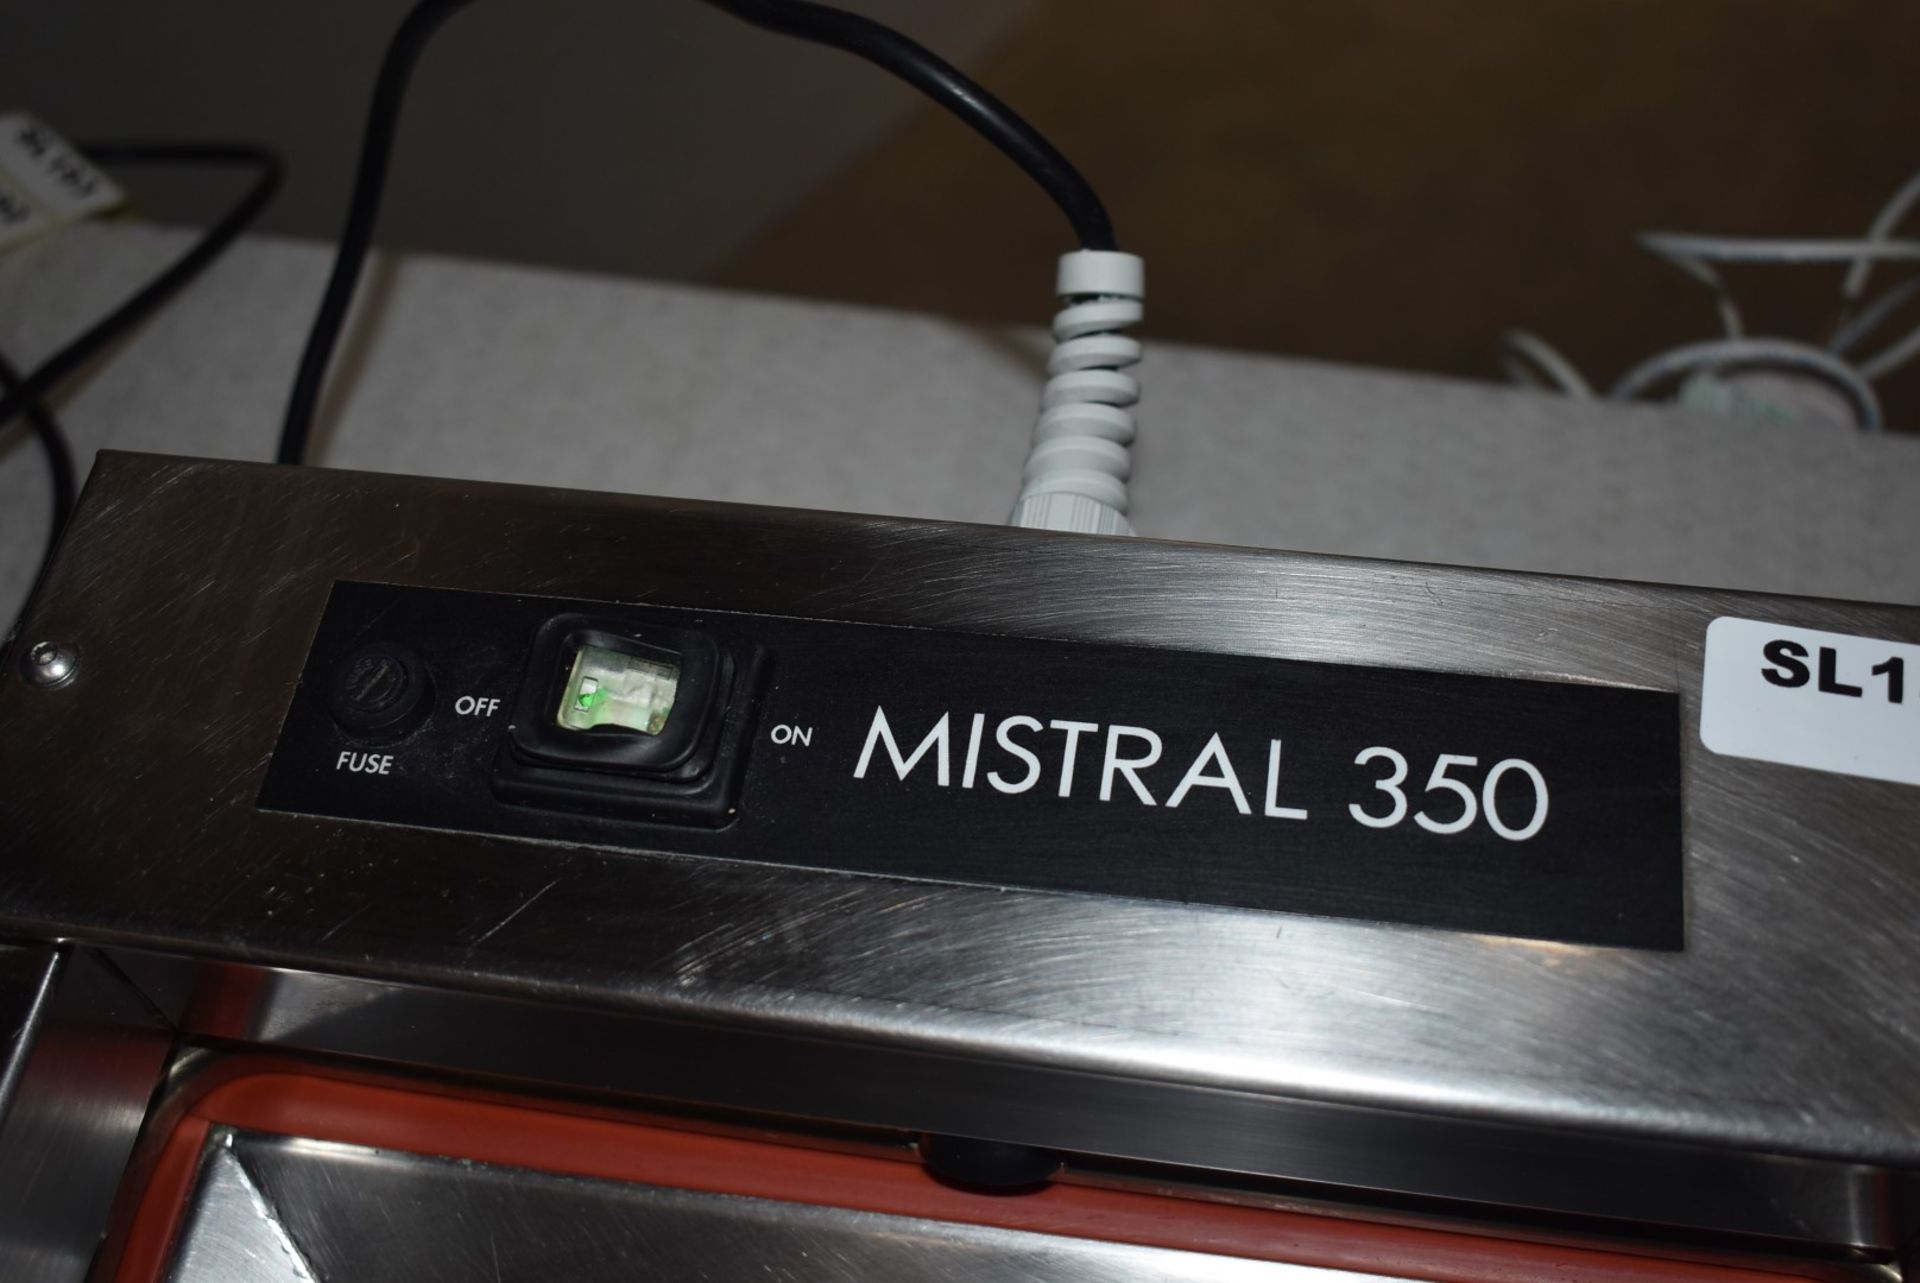 1 x Mistral 350 Heat Sealing Machine For Fish, Meats and More - Recently Removed From a Major - Image 5 of 10